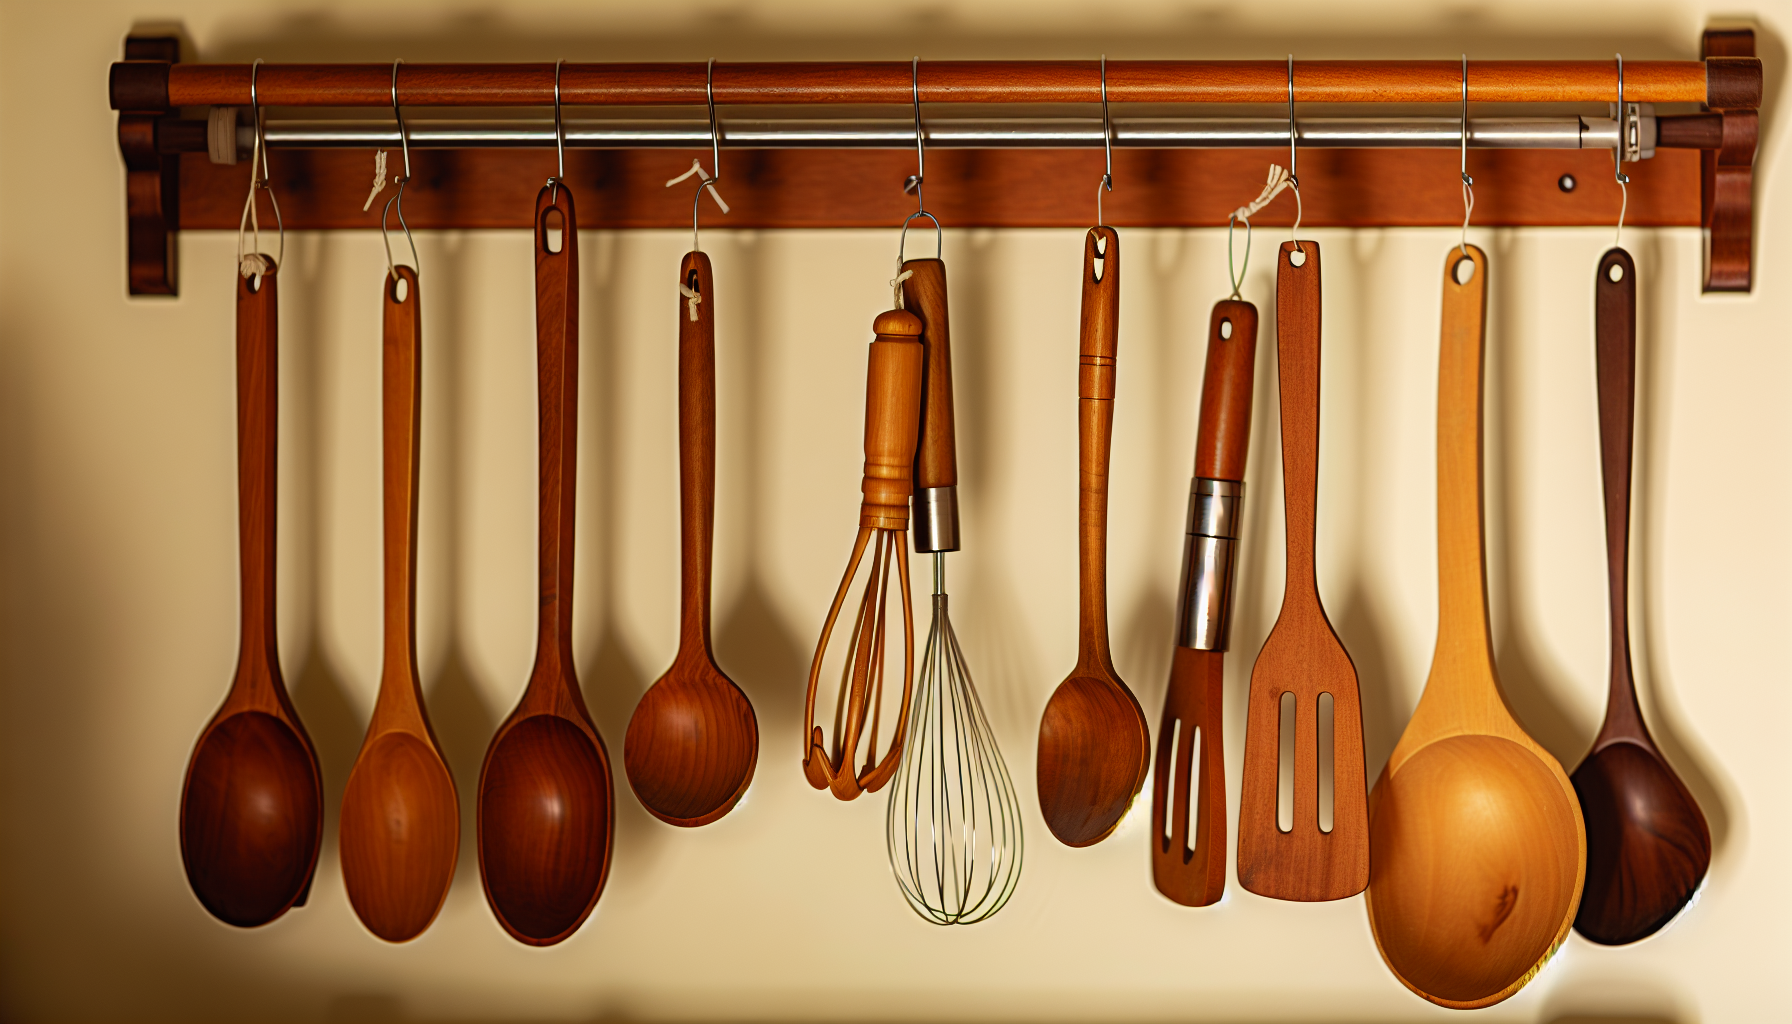 Wooden spoons, tongs, and whisks are essential cooking utensils